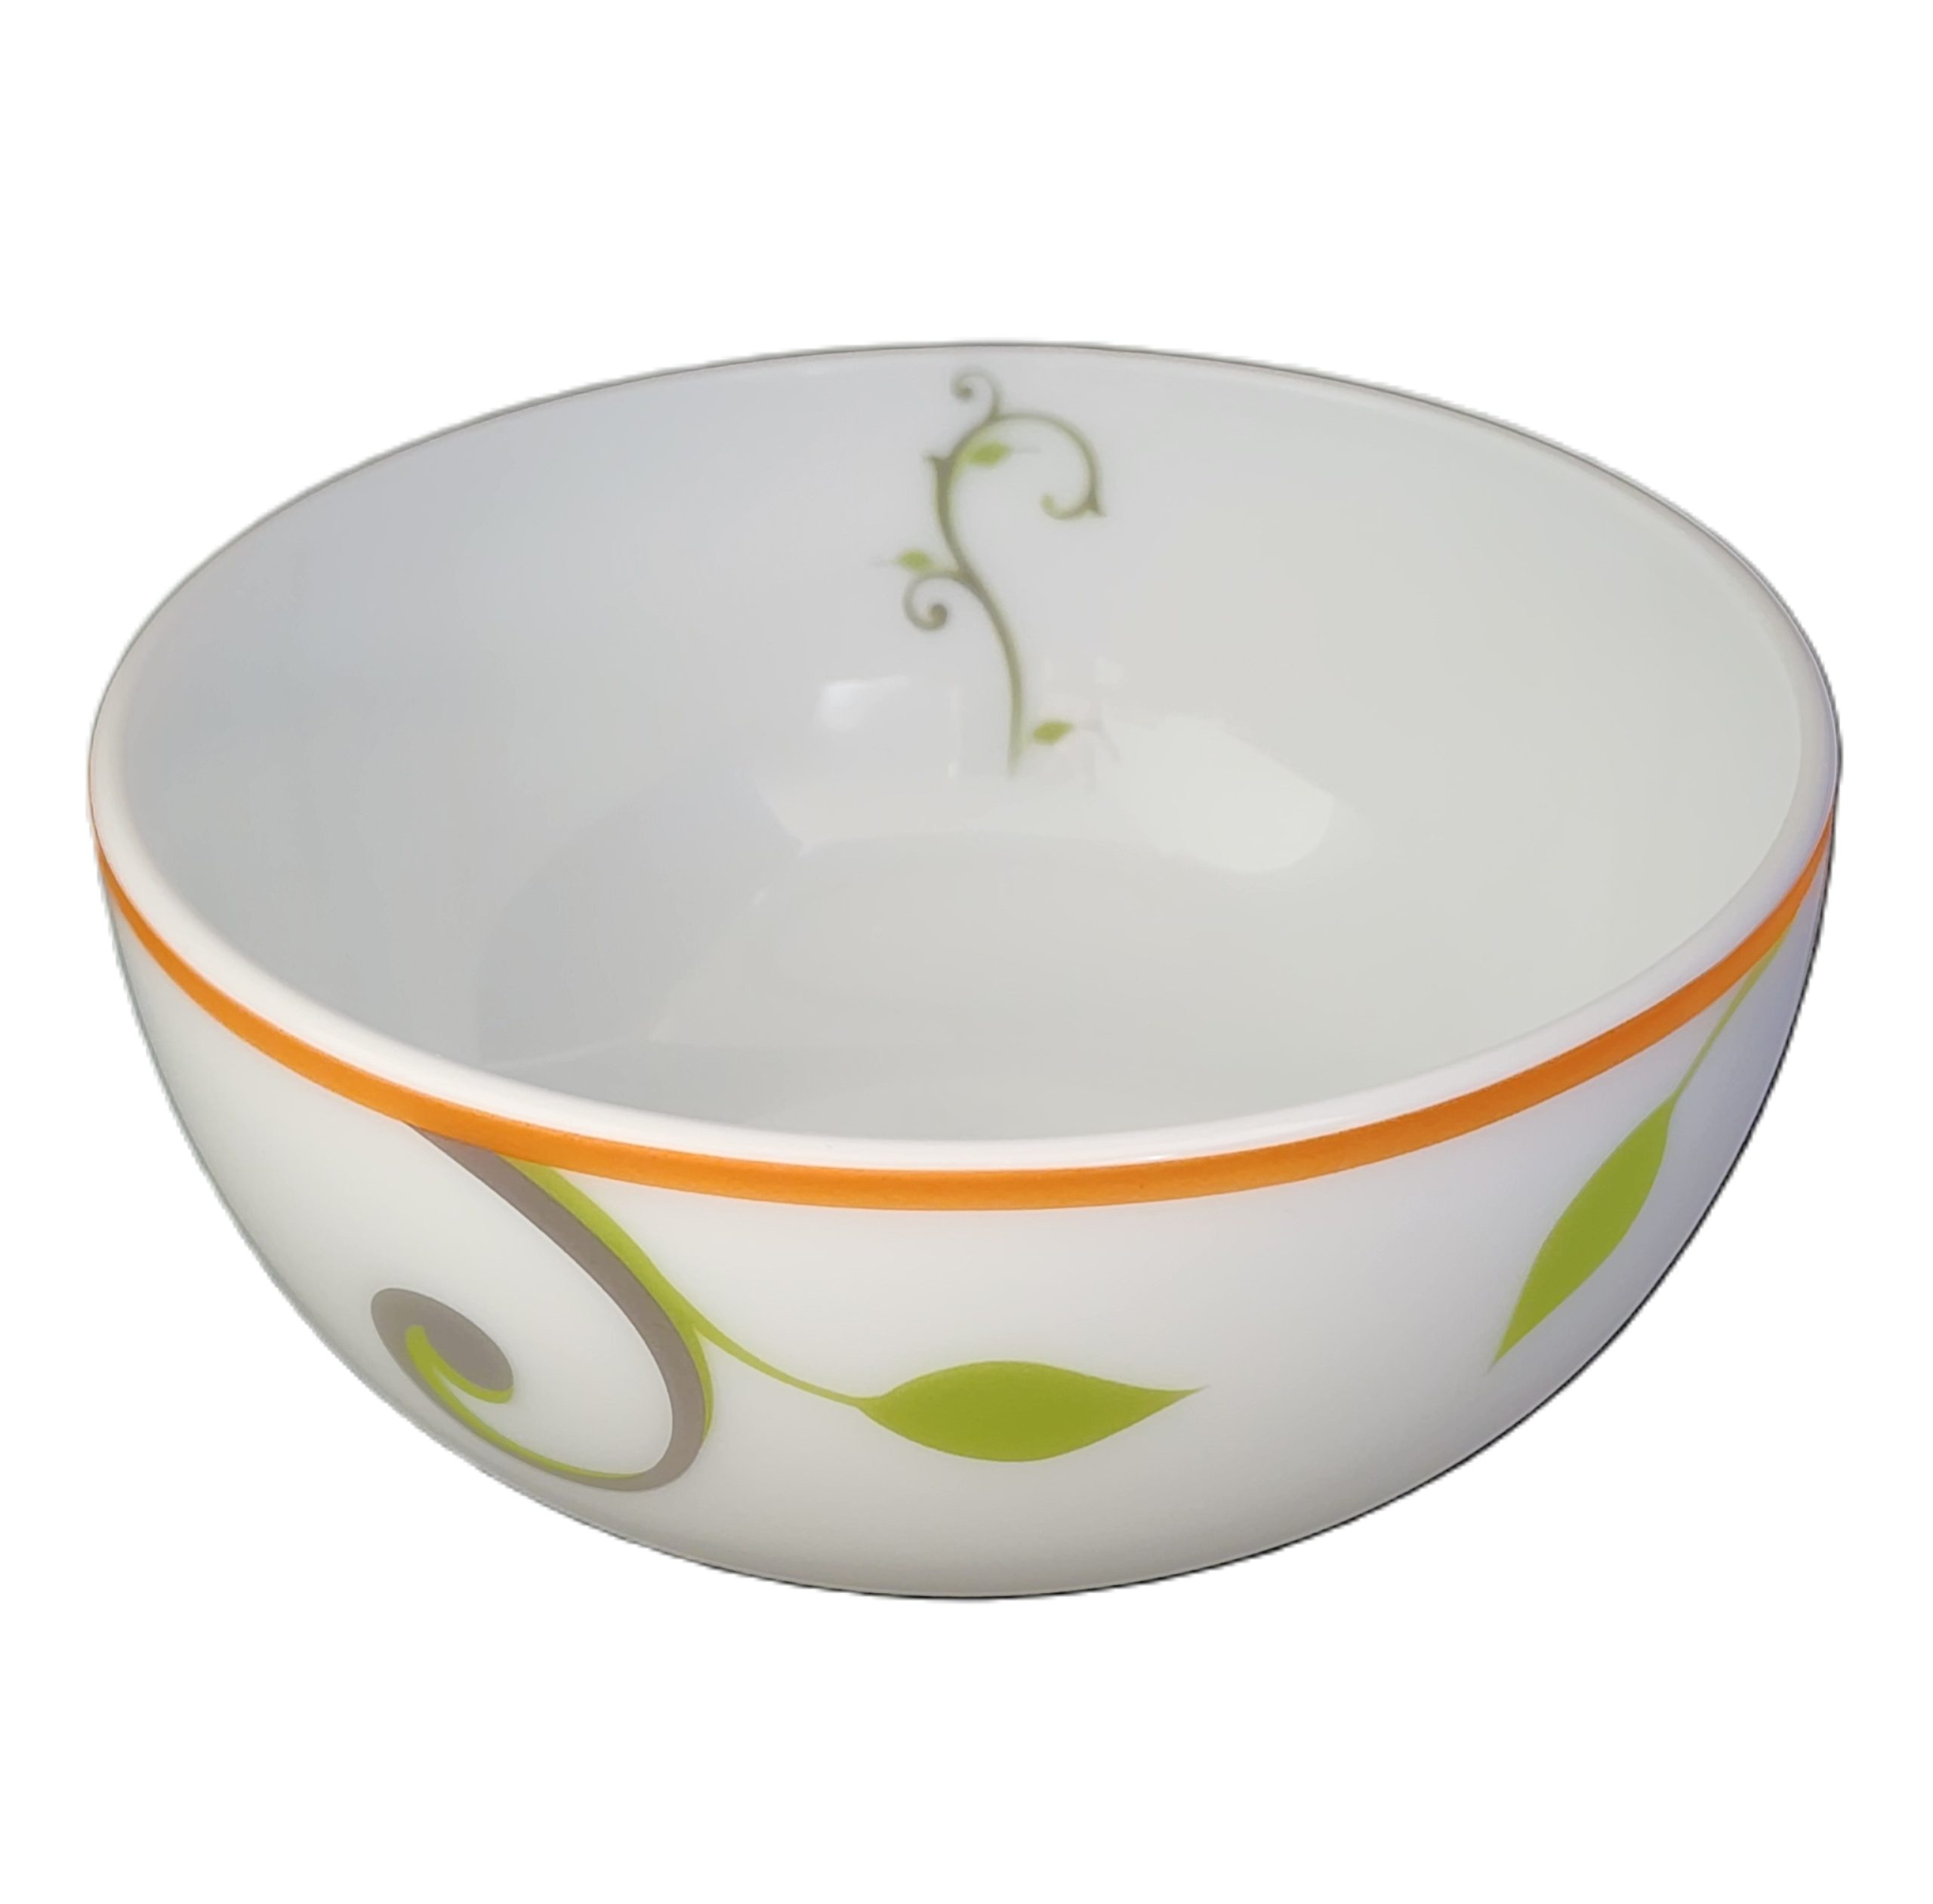 Portion/Nutrition_Guidance_Cereal/Soup_Bowl_Glass - 12-oz